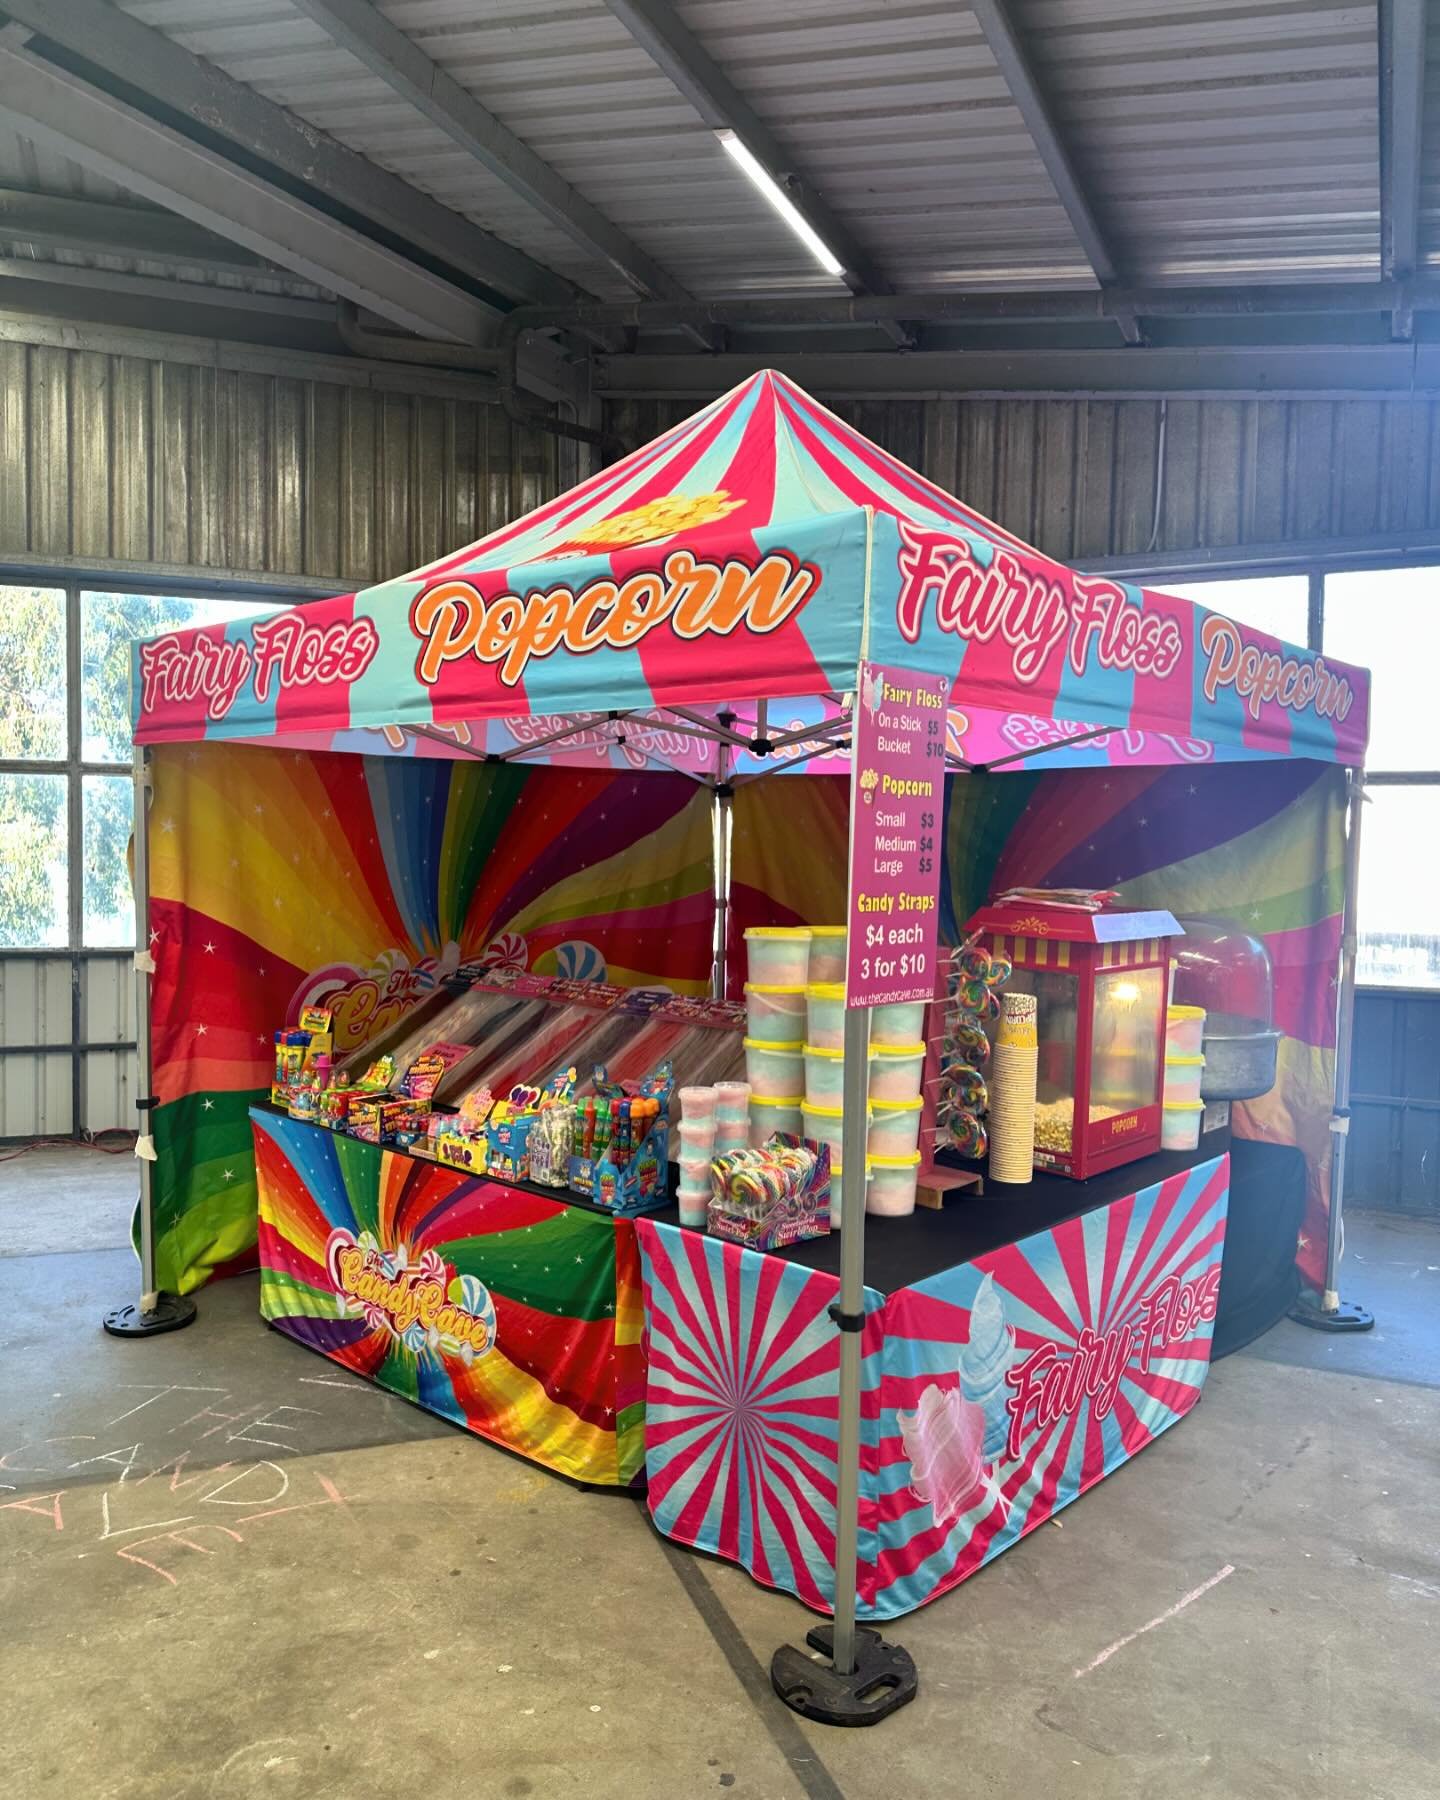 Come down to the Holland Festival today at Caribbean Gardens Ferntree Gully VIC #hollandfestival #vic #melbournevents #candystall #candyshop #foryou